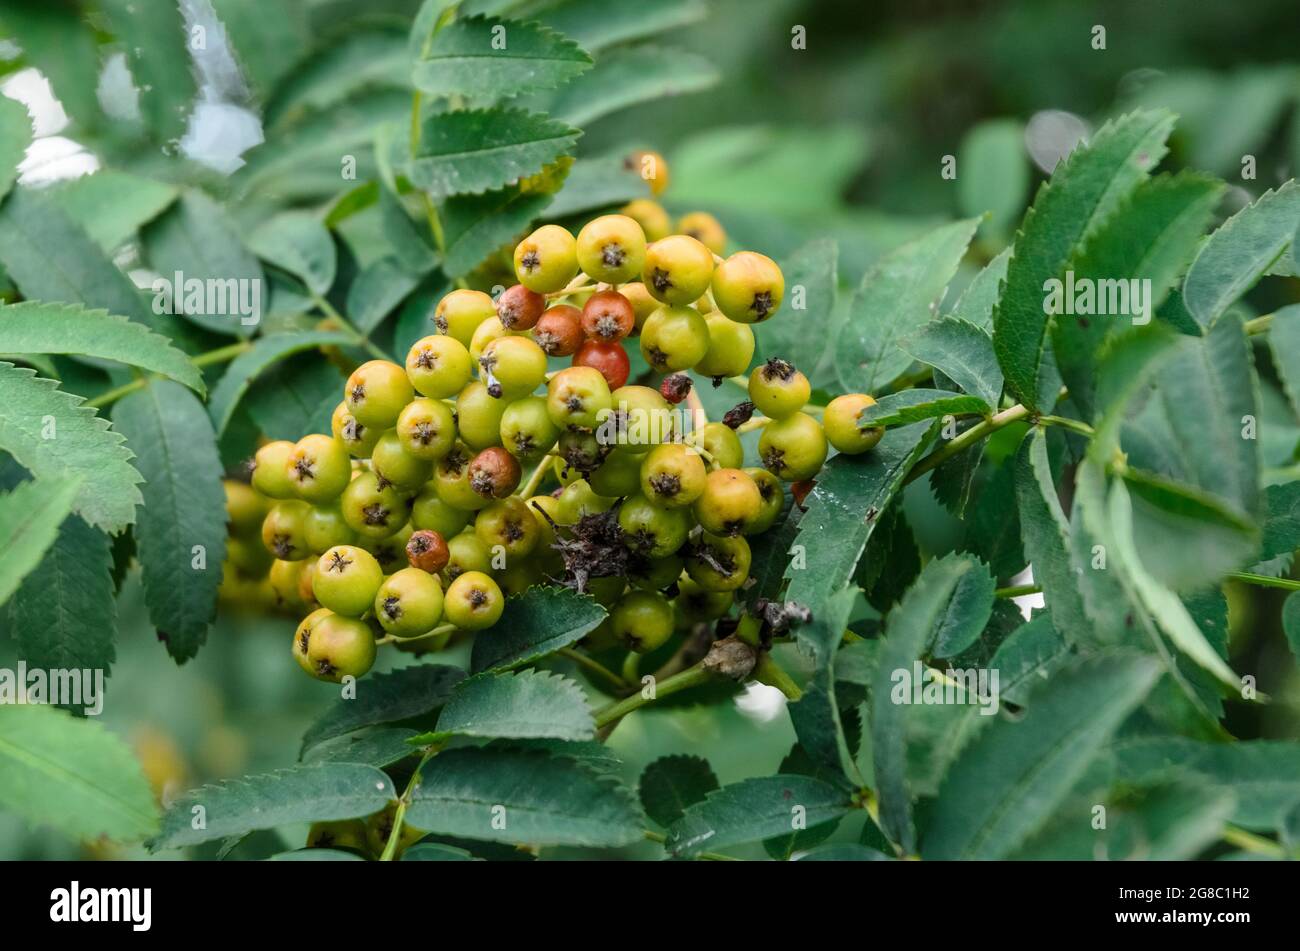 Sorbus aucuparia, known as rowan or mountain-ash shrub with young unripe green berries in a forest Stock Photo